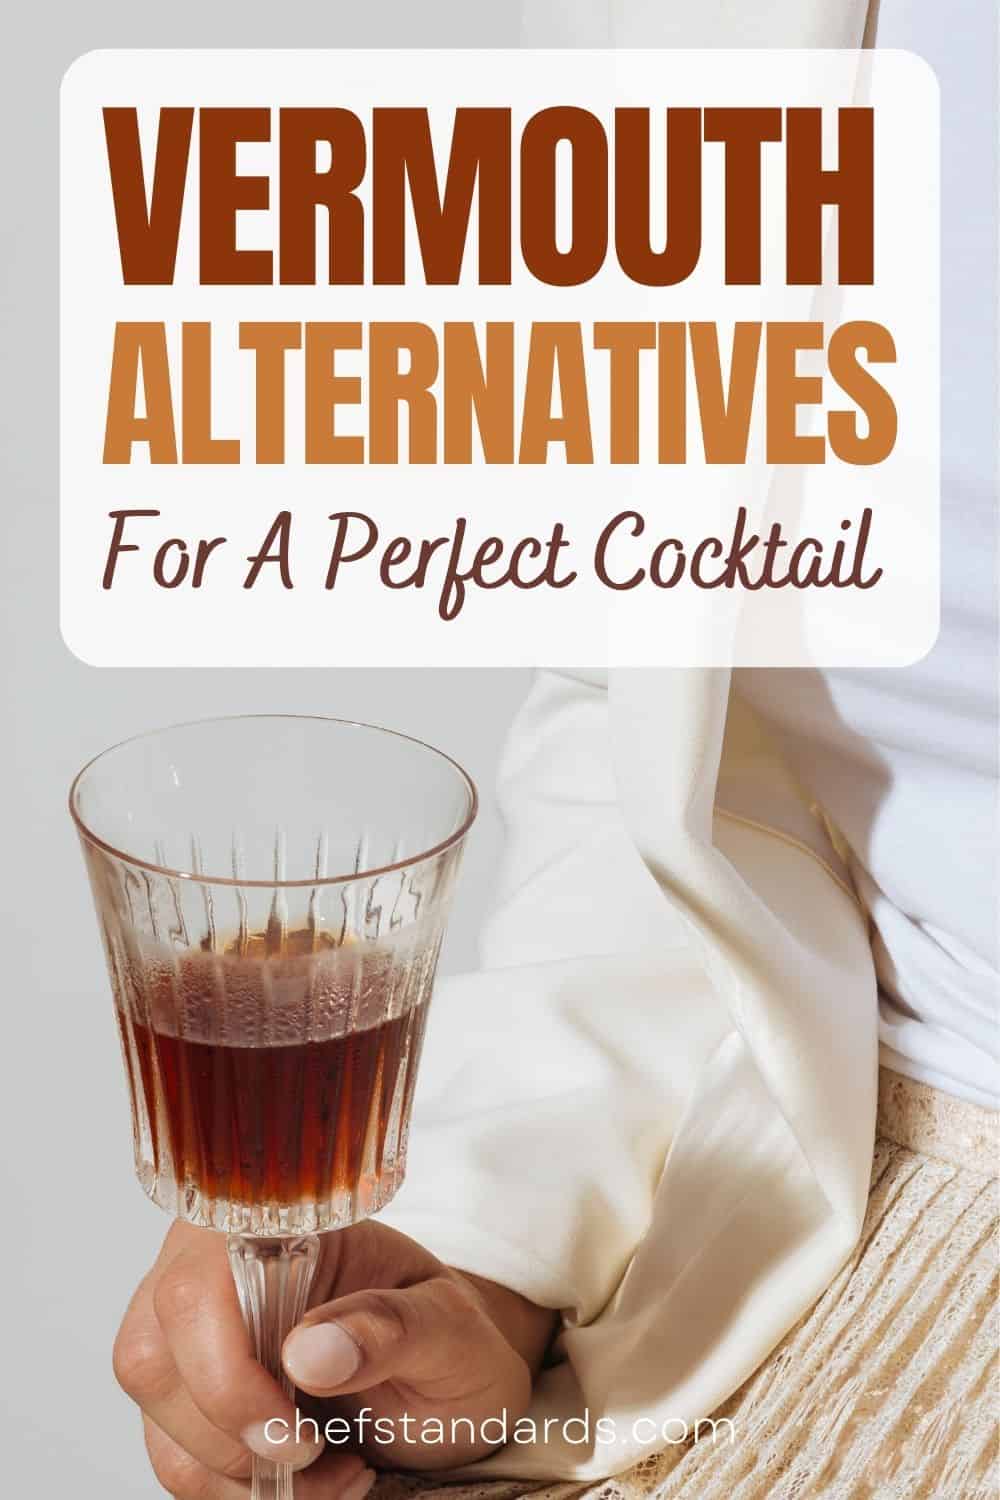 12 Finest Dry And Sweet Vermouth Substitutes To Consider